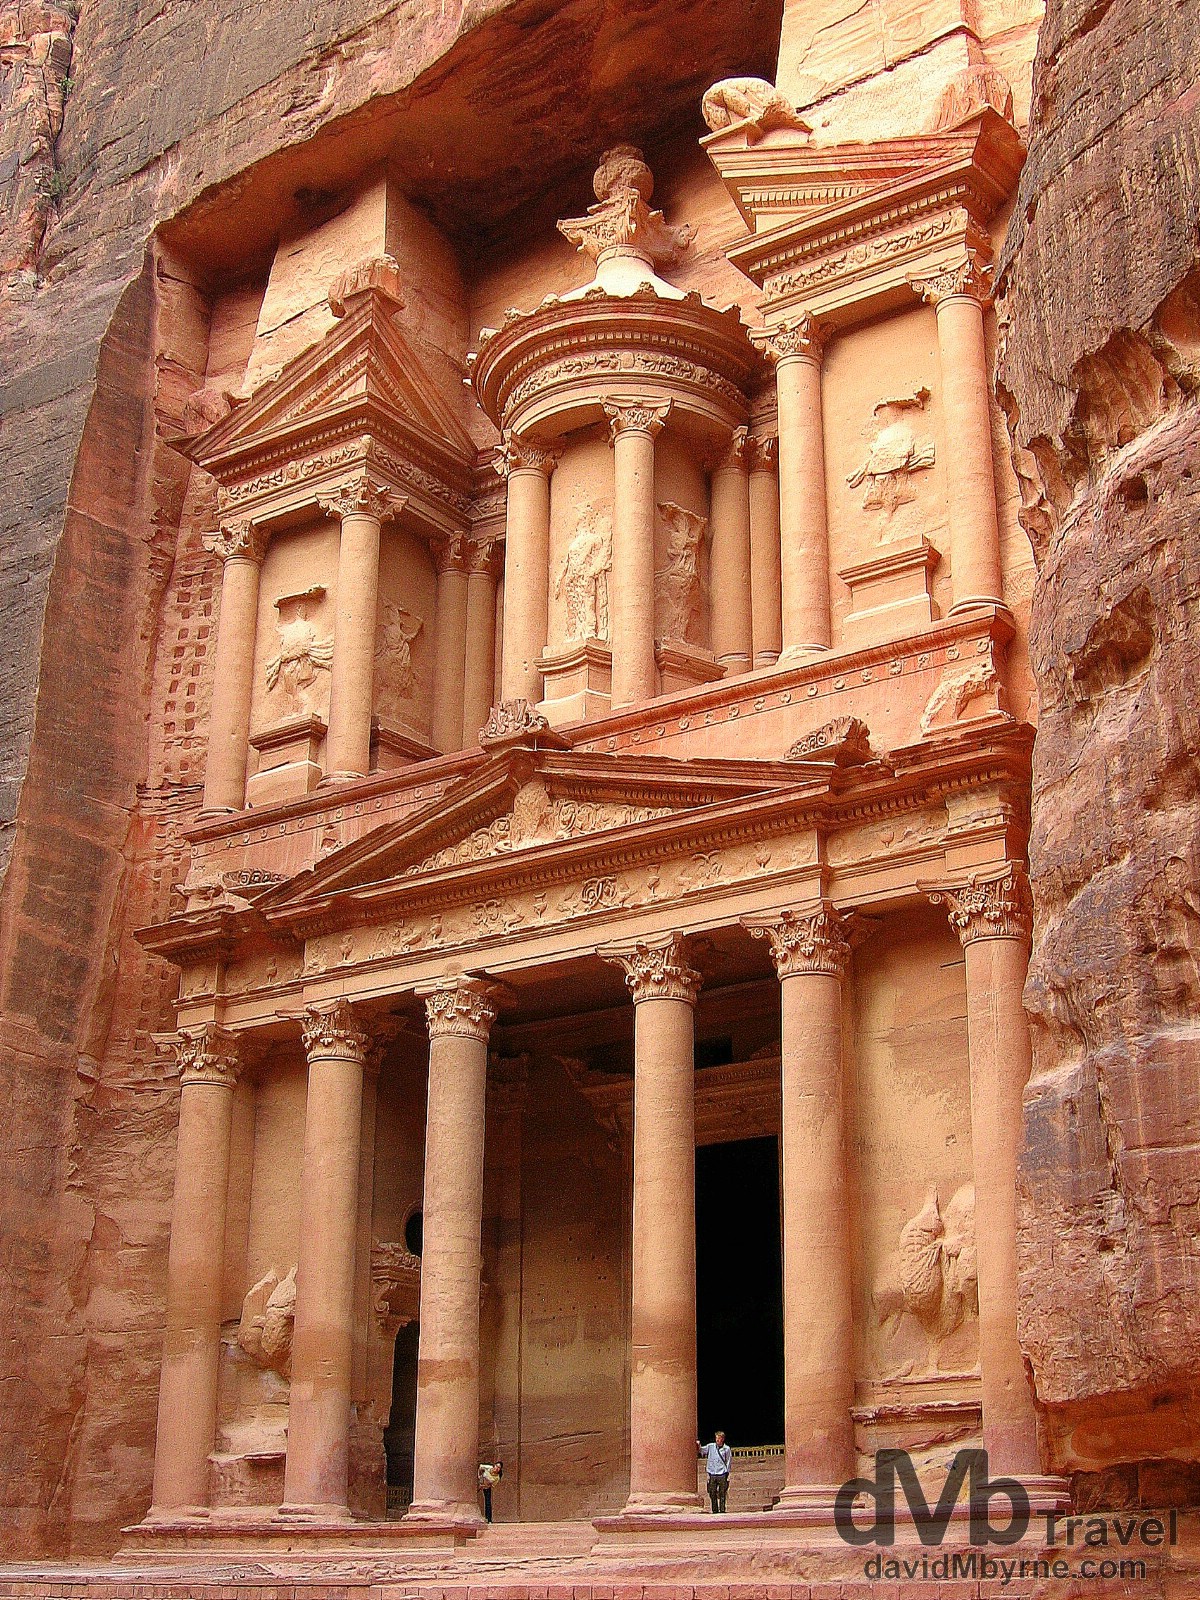 The facade of Al Khazneh (The Treasury), probably the most famous structure in Petra, Jordan. April 27, 2008.